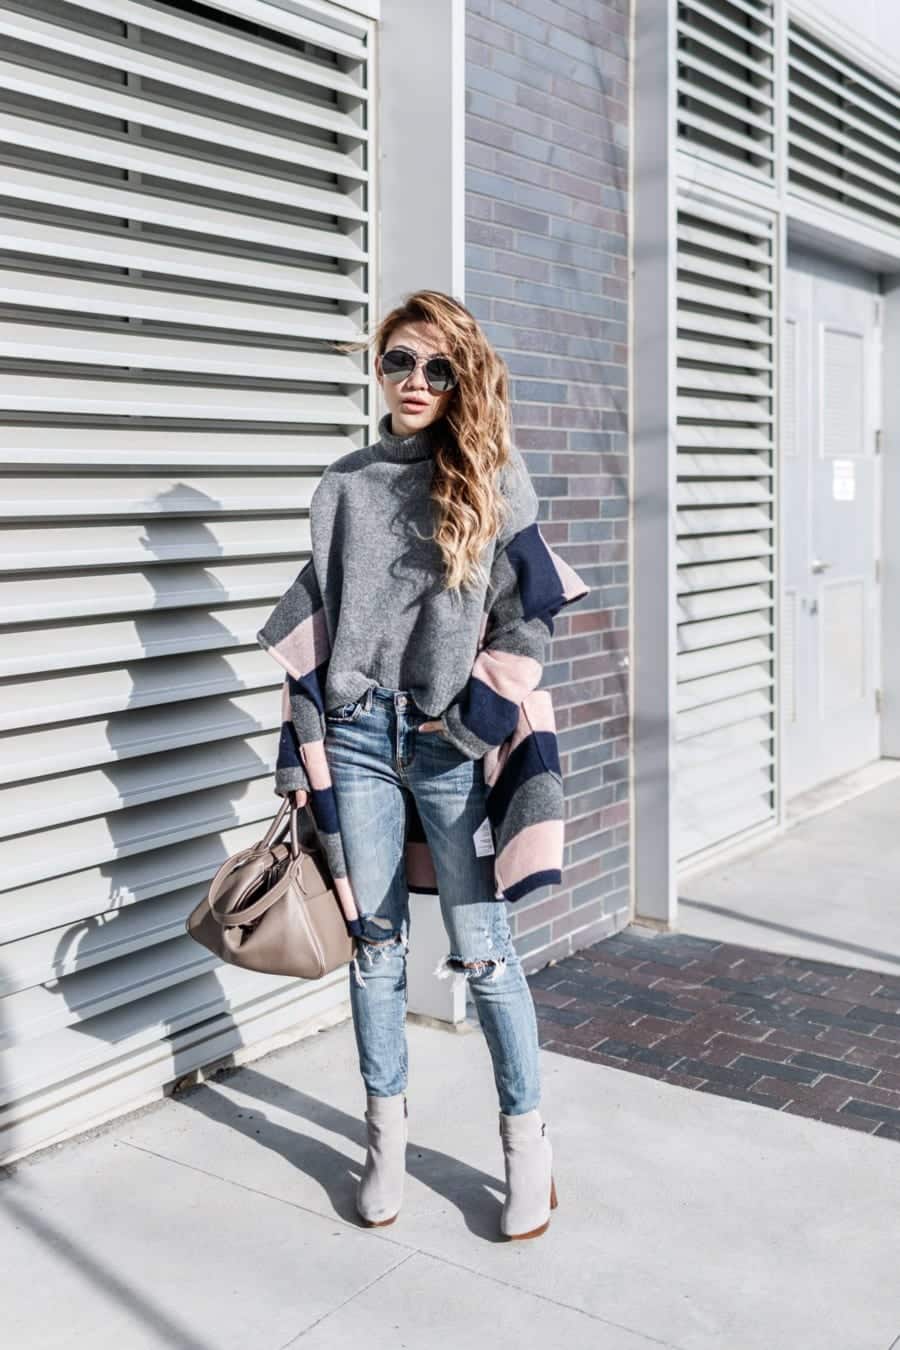 19 Best Winter Jeans Outfits for Girls to Stay Cozy and Chic